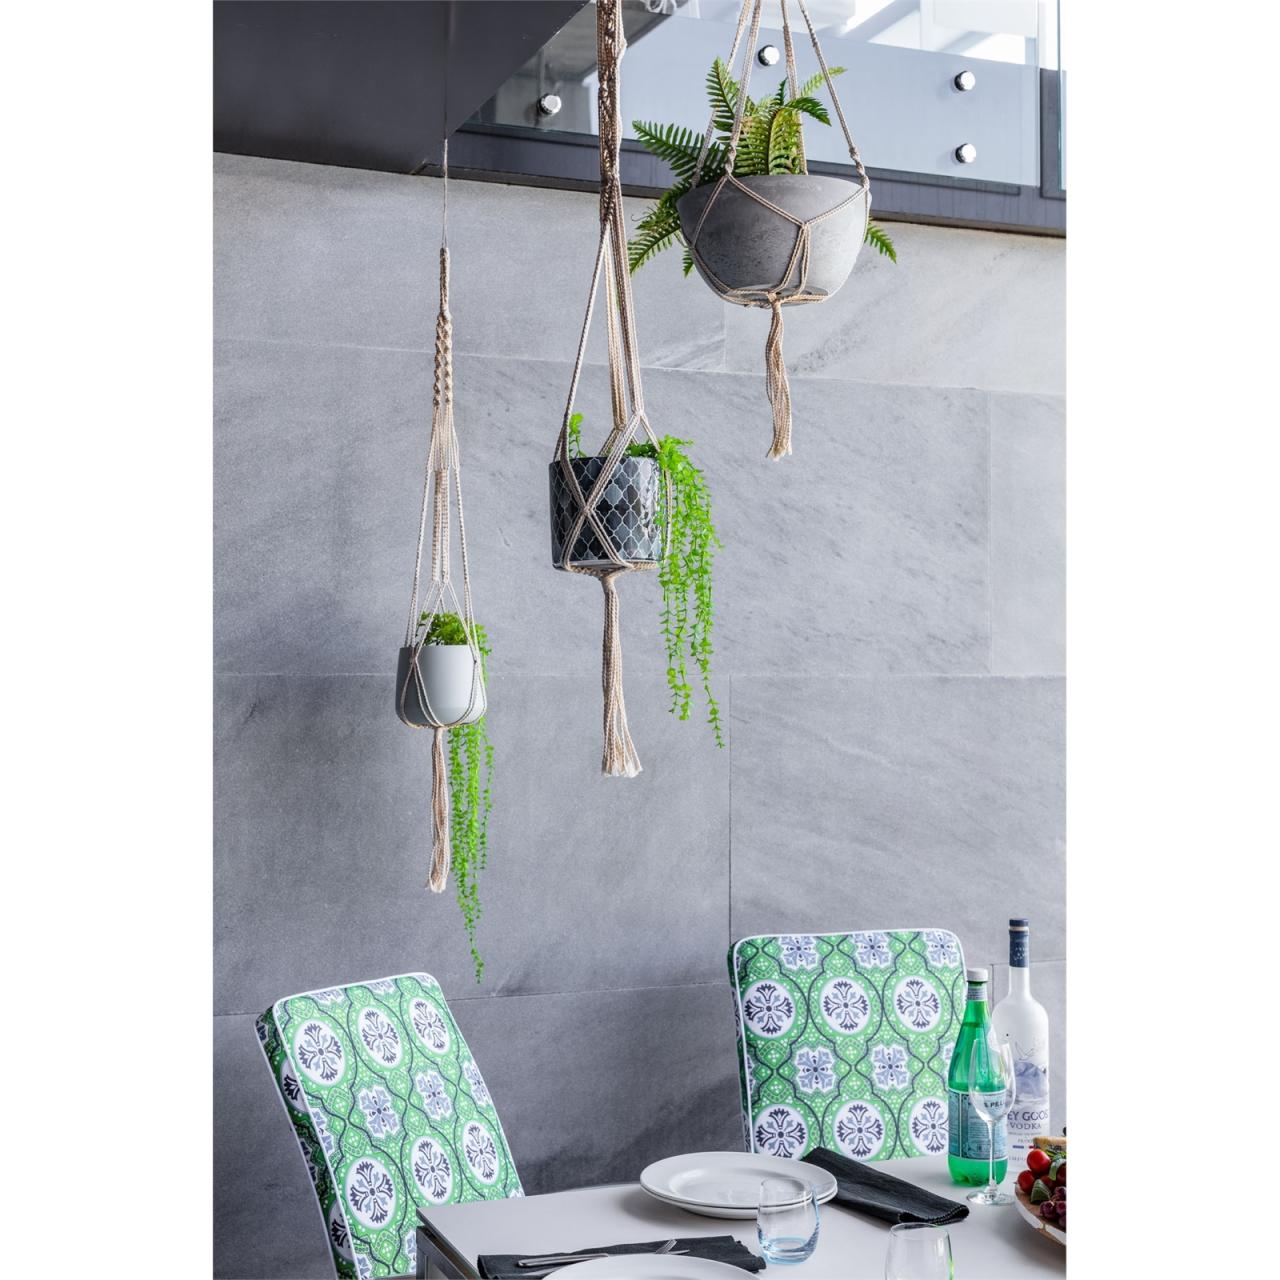 Hanging Plants Indoor | Pot Hanger Bunnings: Enhance Your Outdoor Decor with Stylish and Functional Options